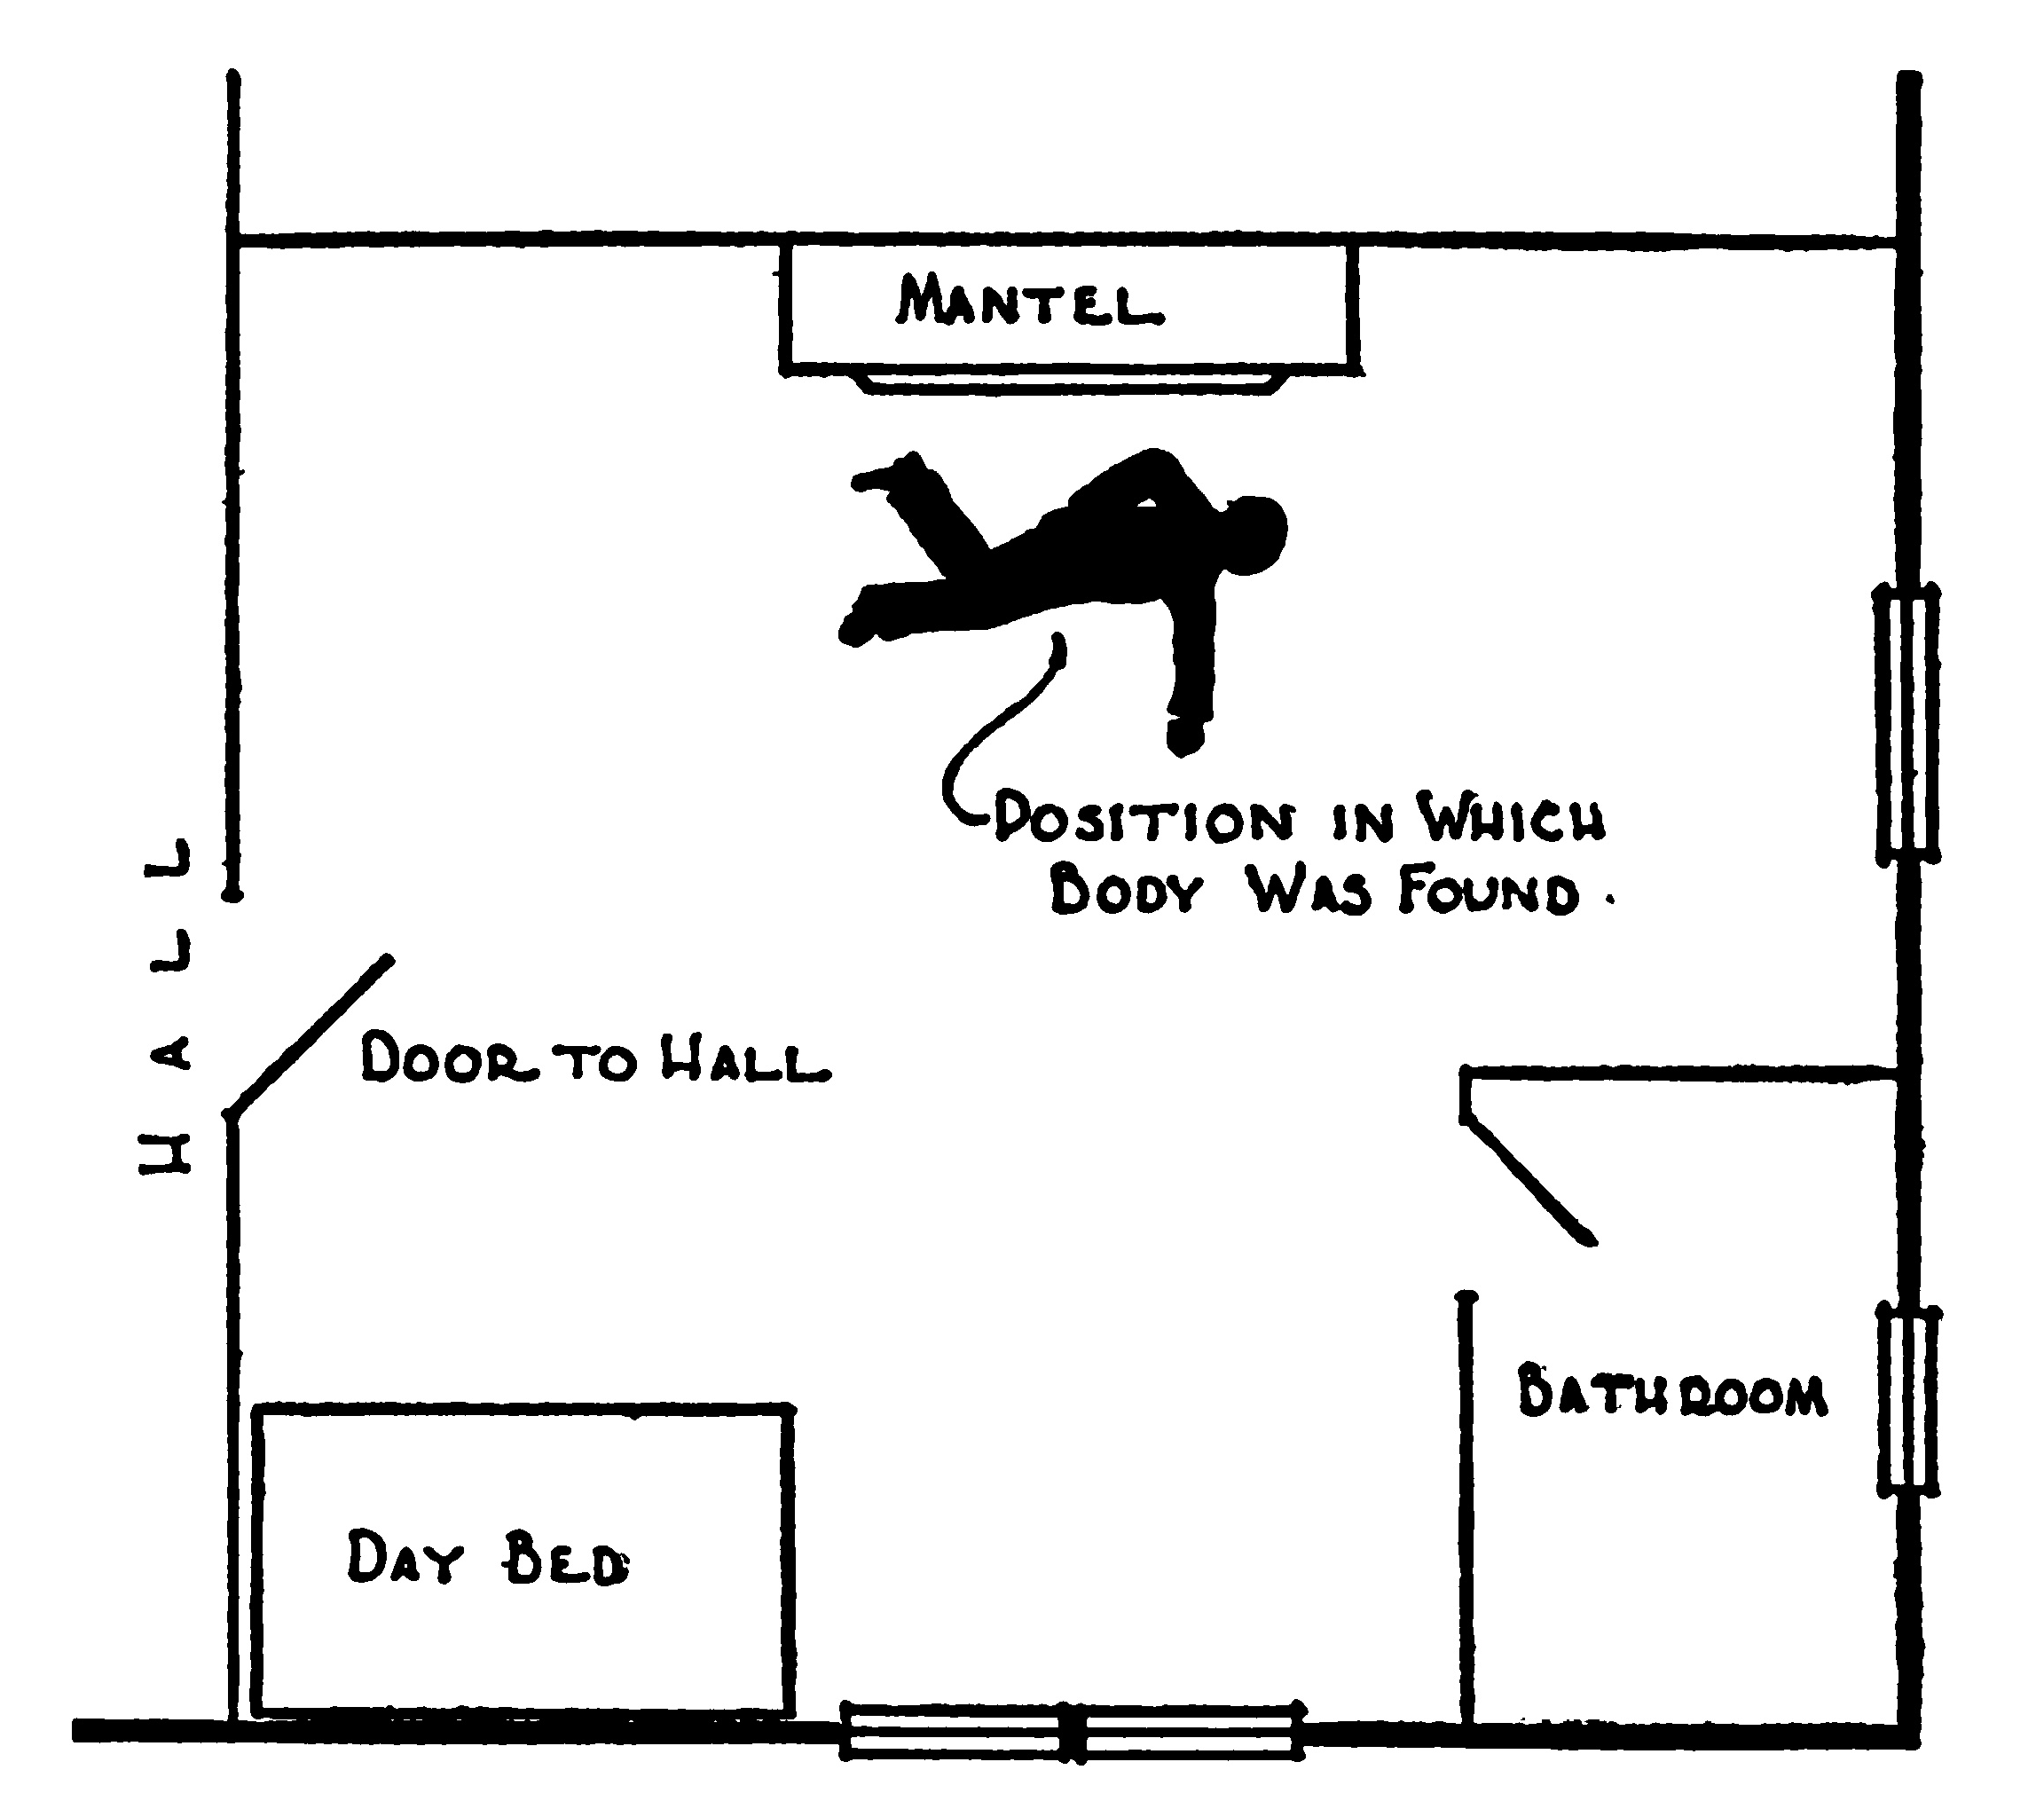 A plan of a bedroom, showing a     fireplace along one wall across from a day bed. In front of the     fireplace is the silhouette of a fallen body, labelled “position     in which body was found.”